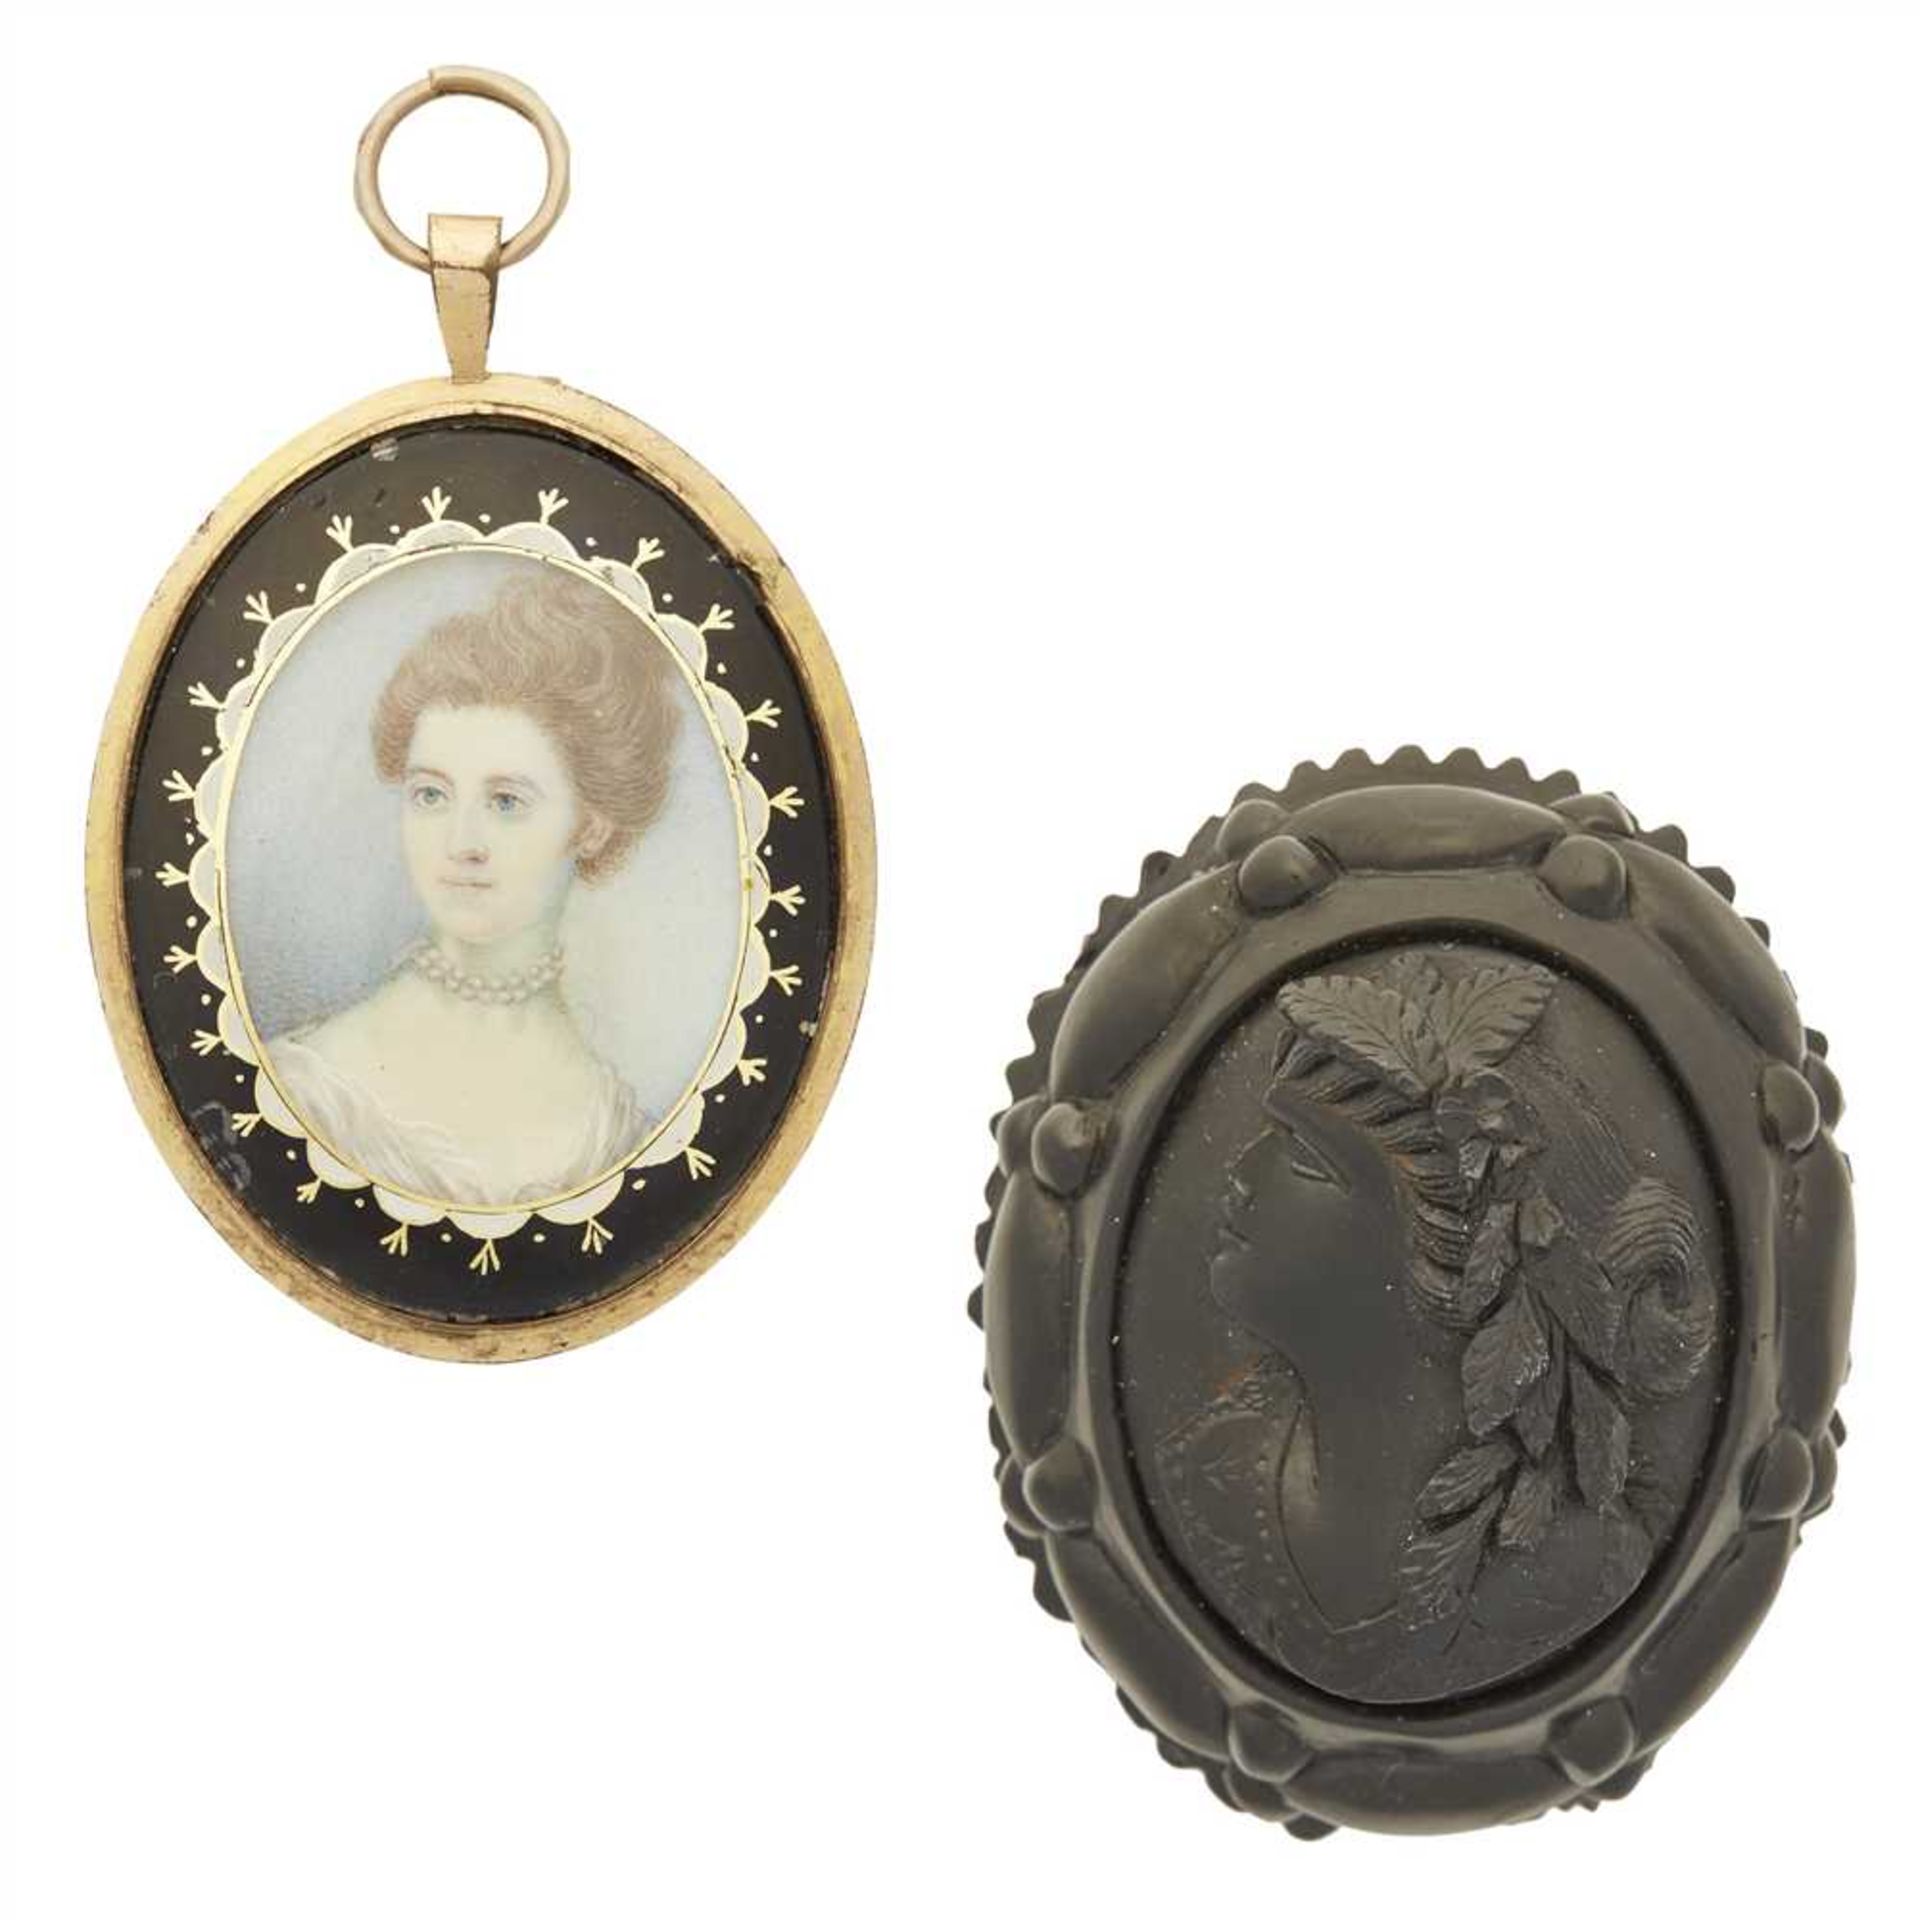 A Regency miniature presented in an oval frame with black enamel detail; together with a jet cameo